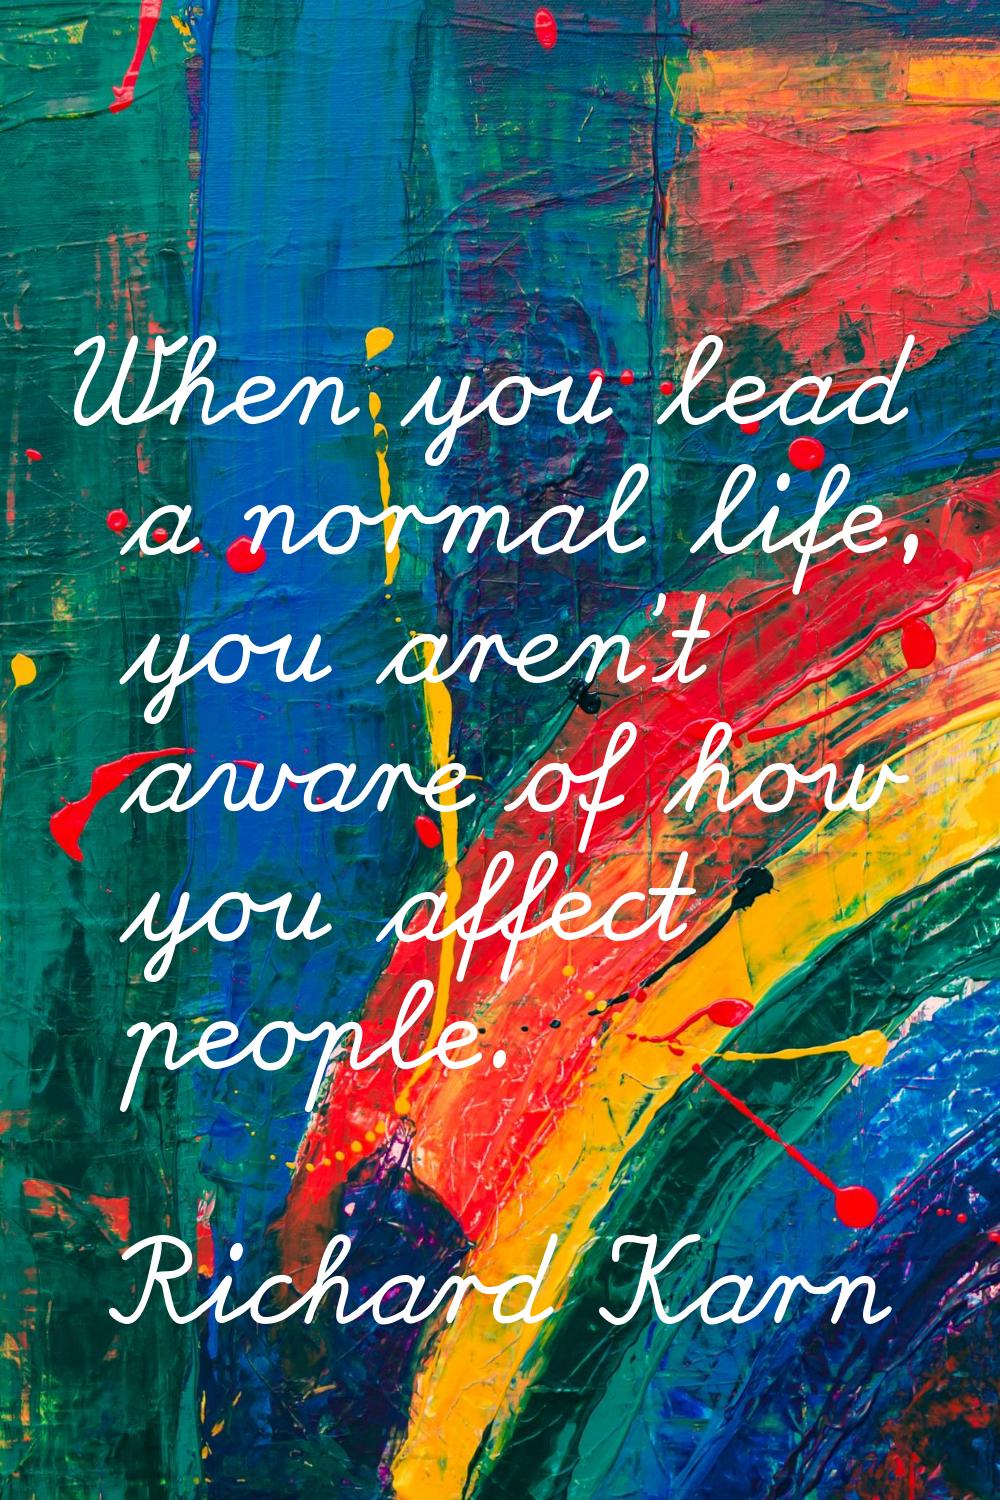 When you lead a normal life, you aren't aware of how you affect people.